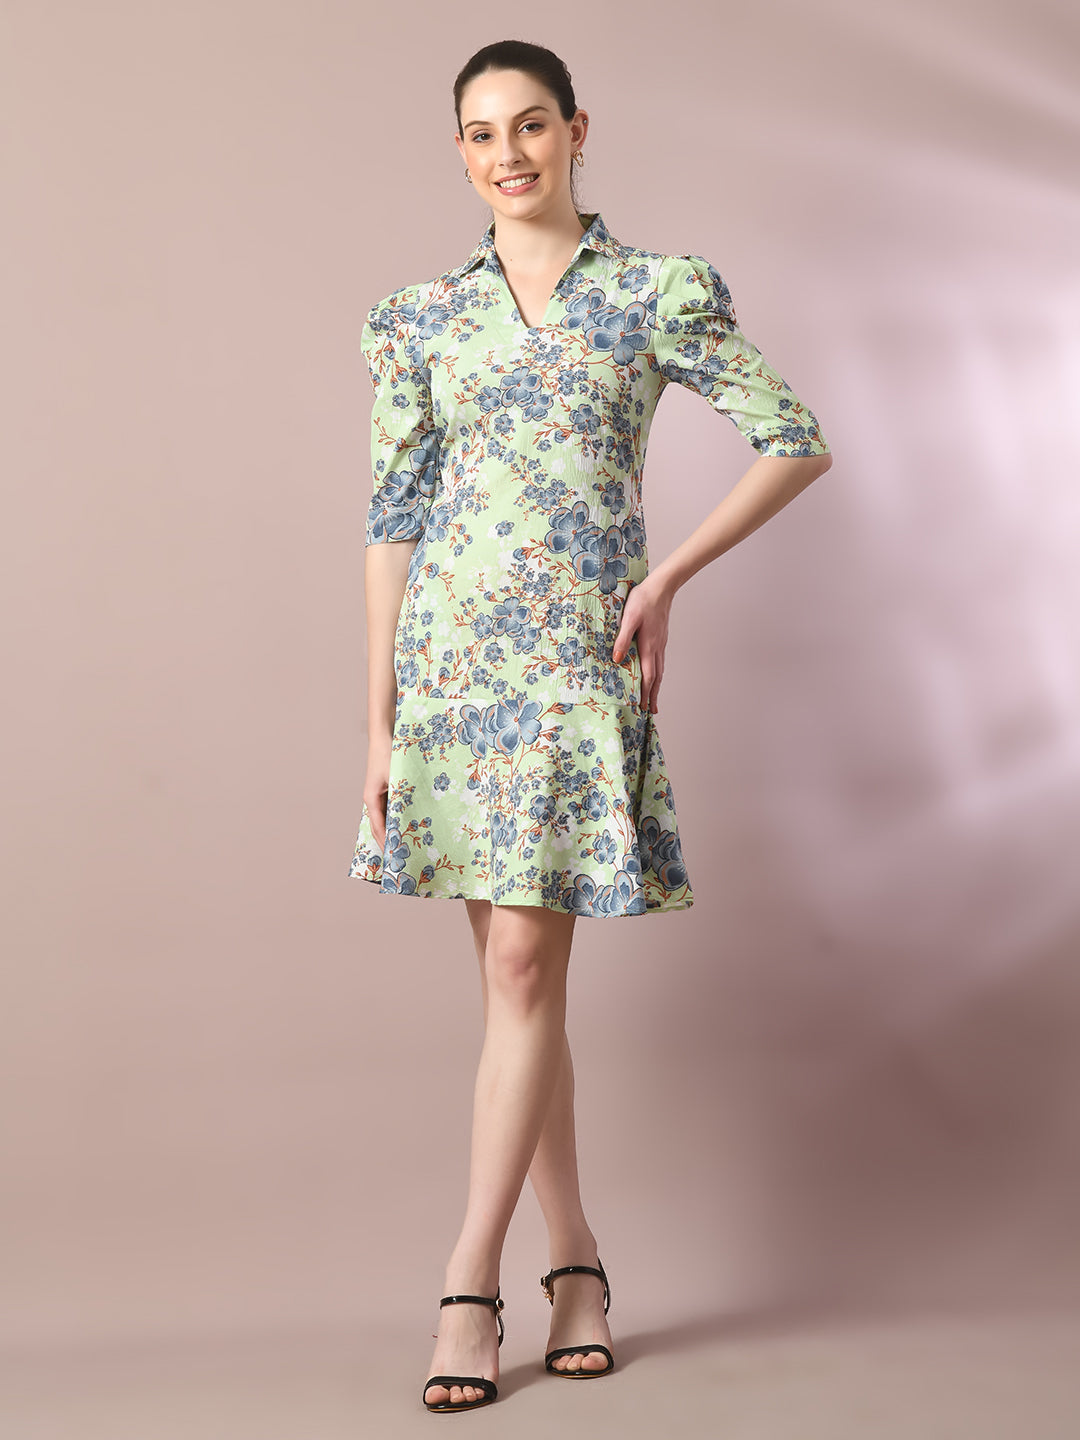 Women's  Green Printed Shirt Collar Fit And Flare Party Dress  - Myshka